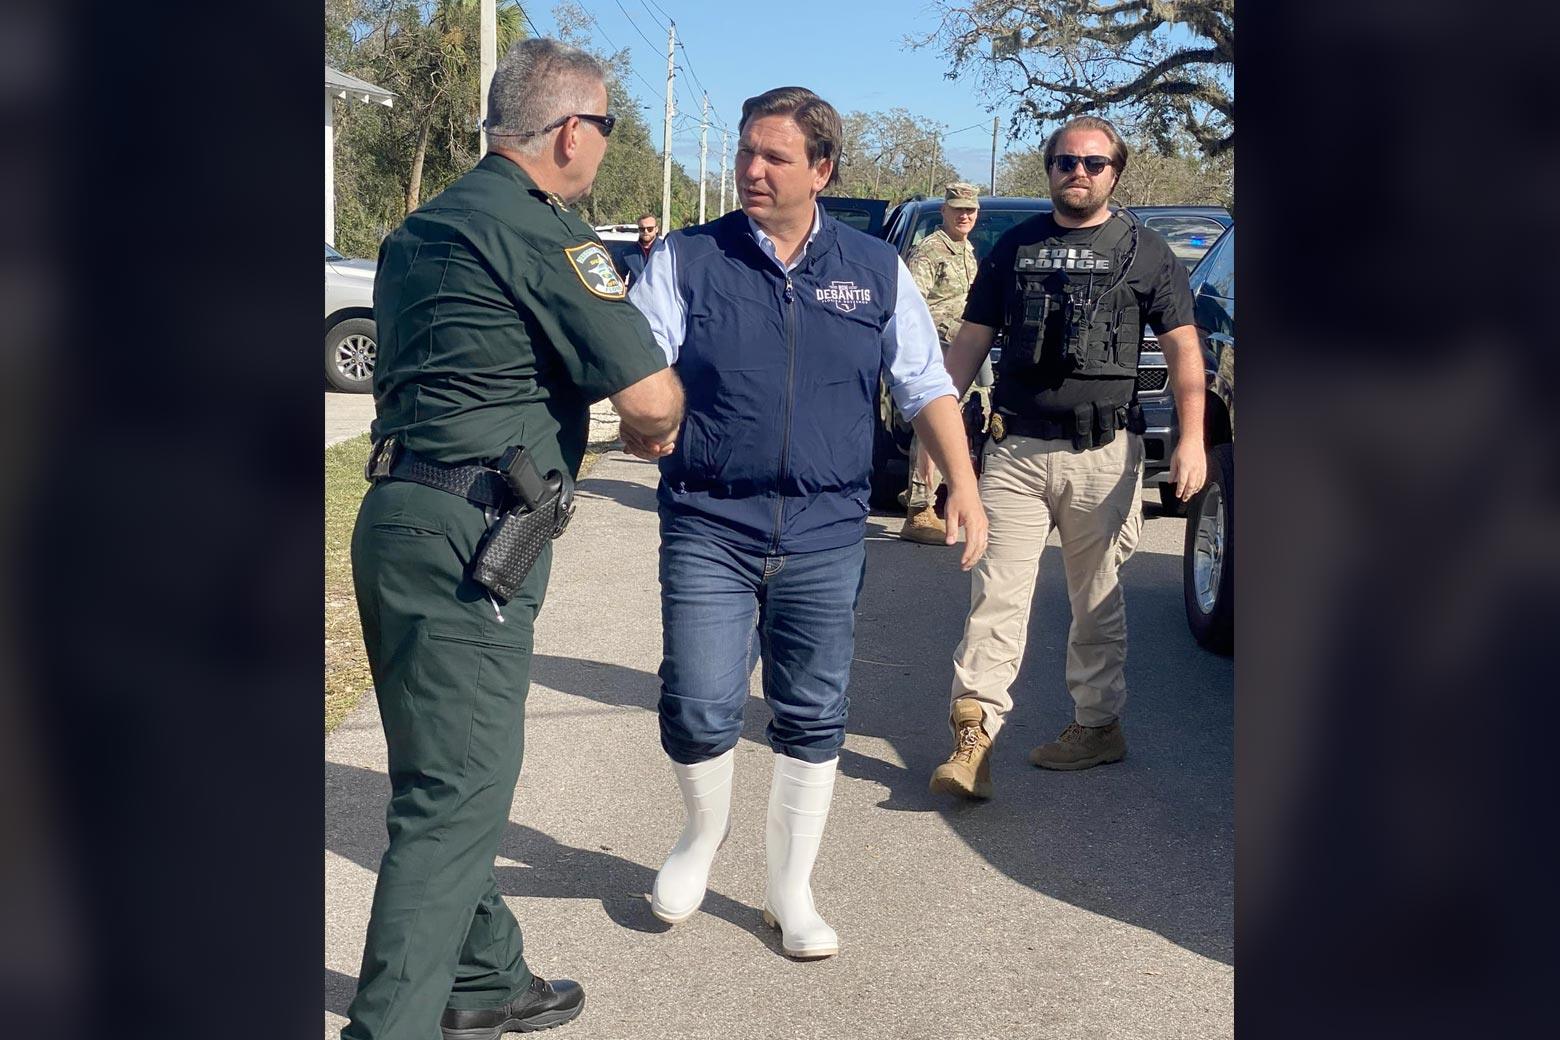 DeSantis, wearing a blue vest and comically enormous white boots, shakes a law enforcement officer's hand.